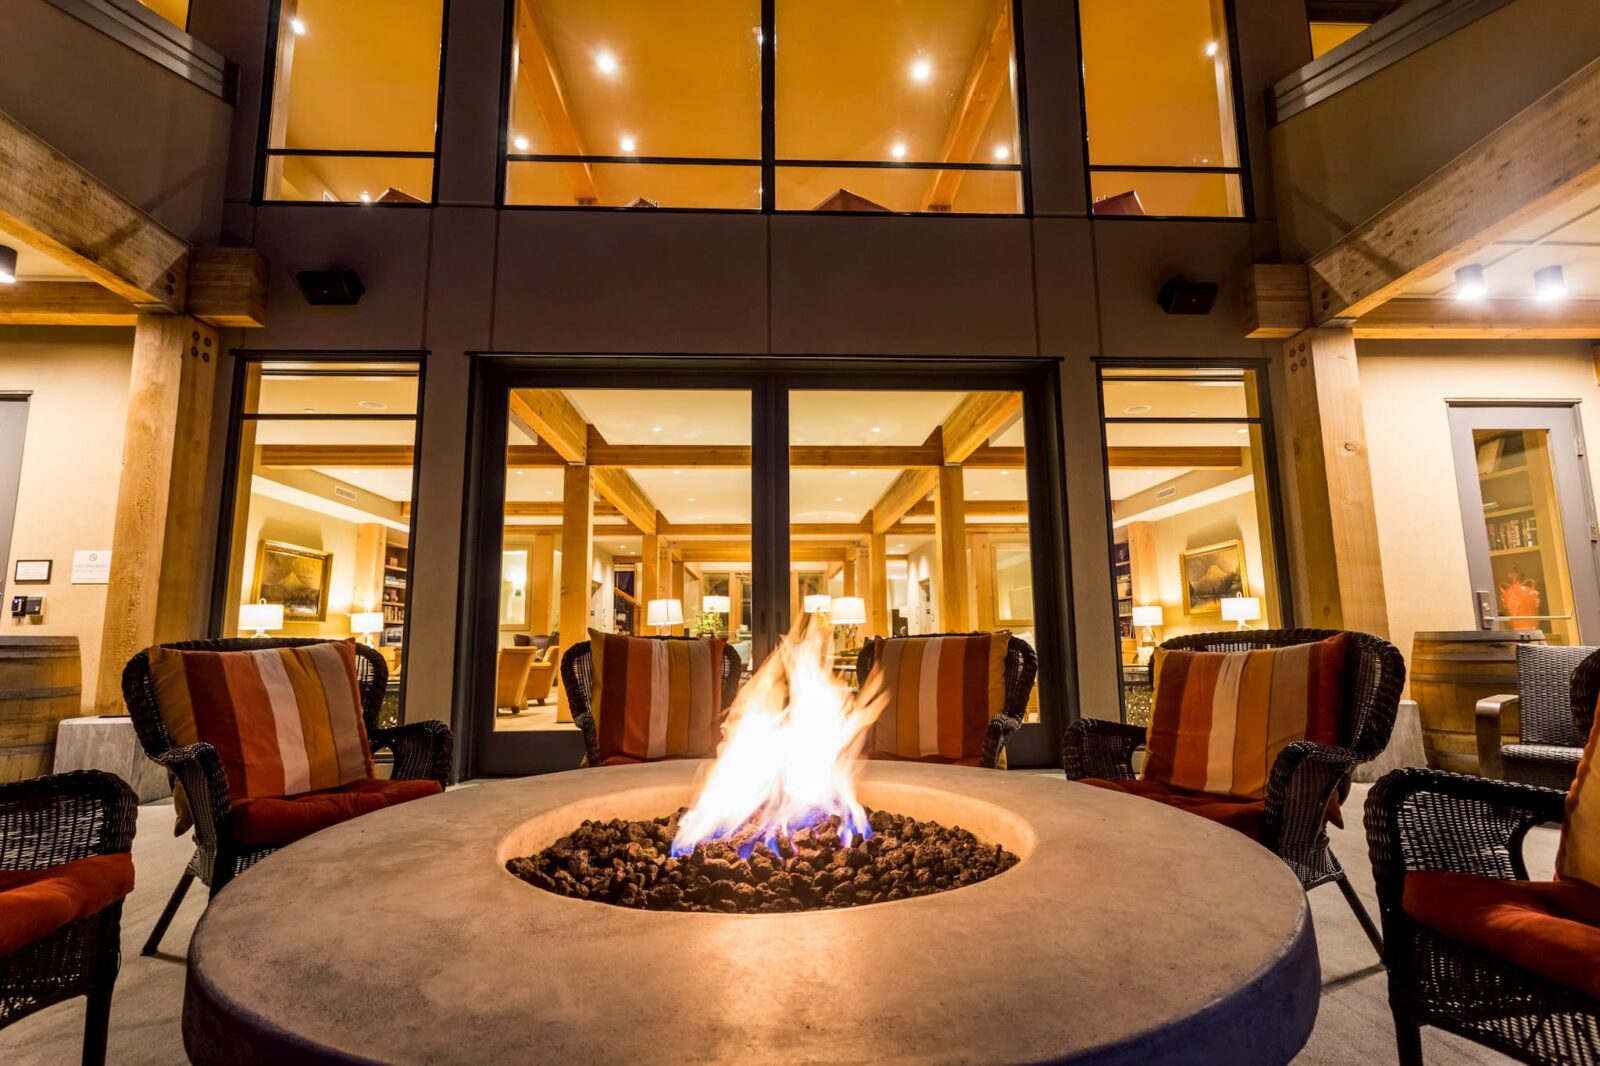 Sit and relax at the firepit in Washington